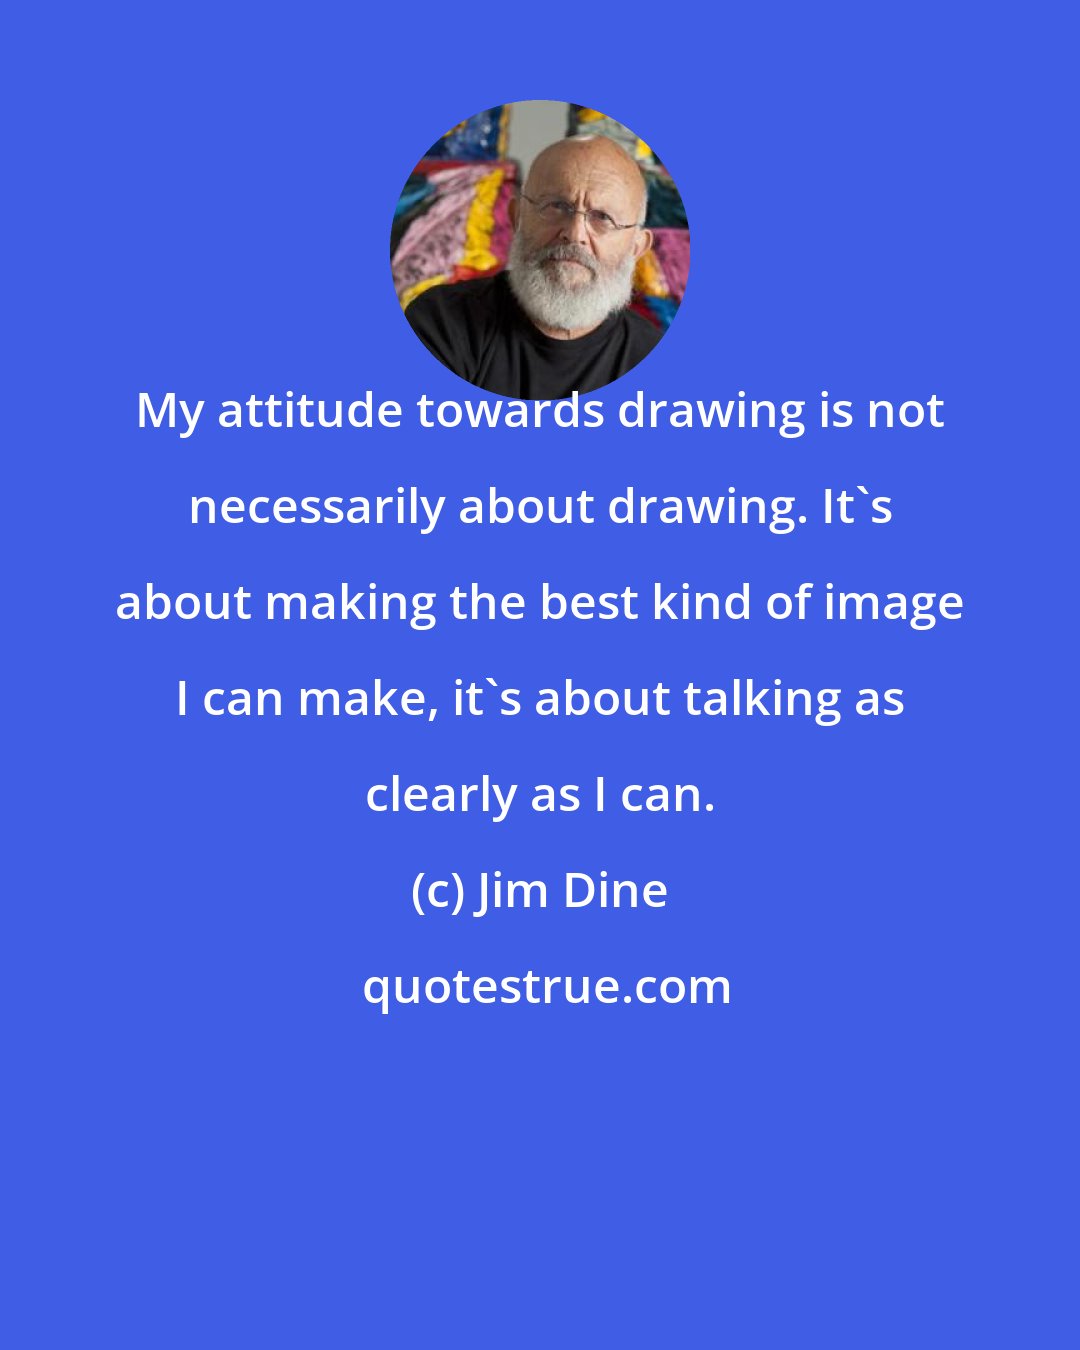 Jim Dine: My attitude towards drawing is not necessarily about drawing. It's about making the best kind of image I can make, it's about talking as clearly as I can.